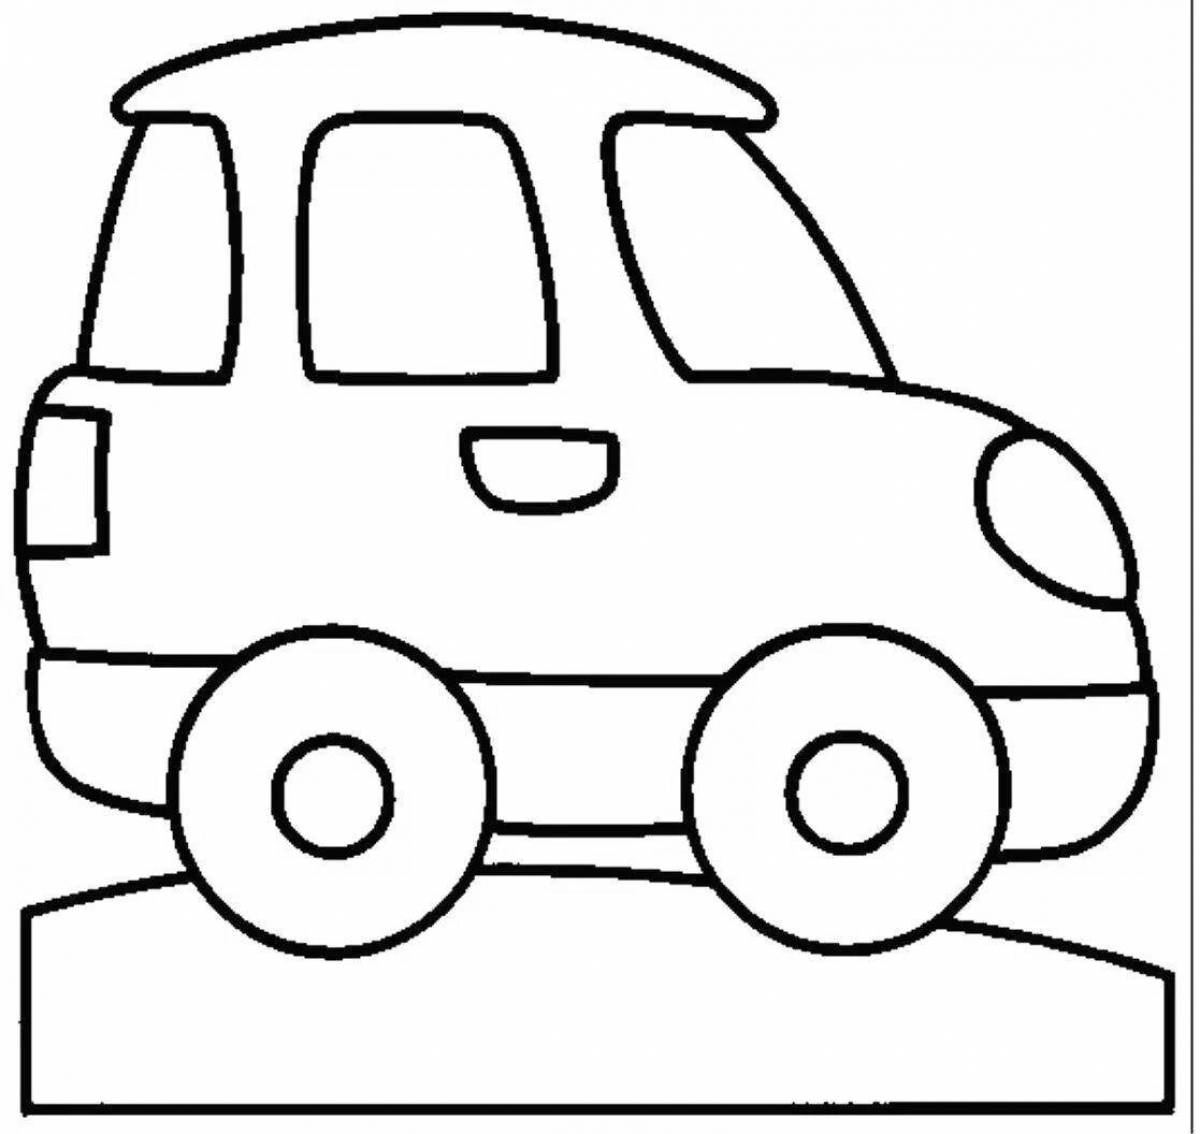 Recreational vehicles 2 junior group coloring